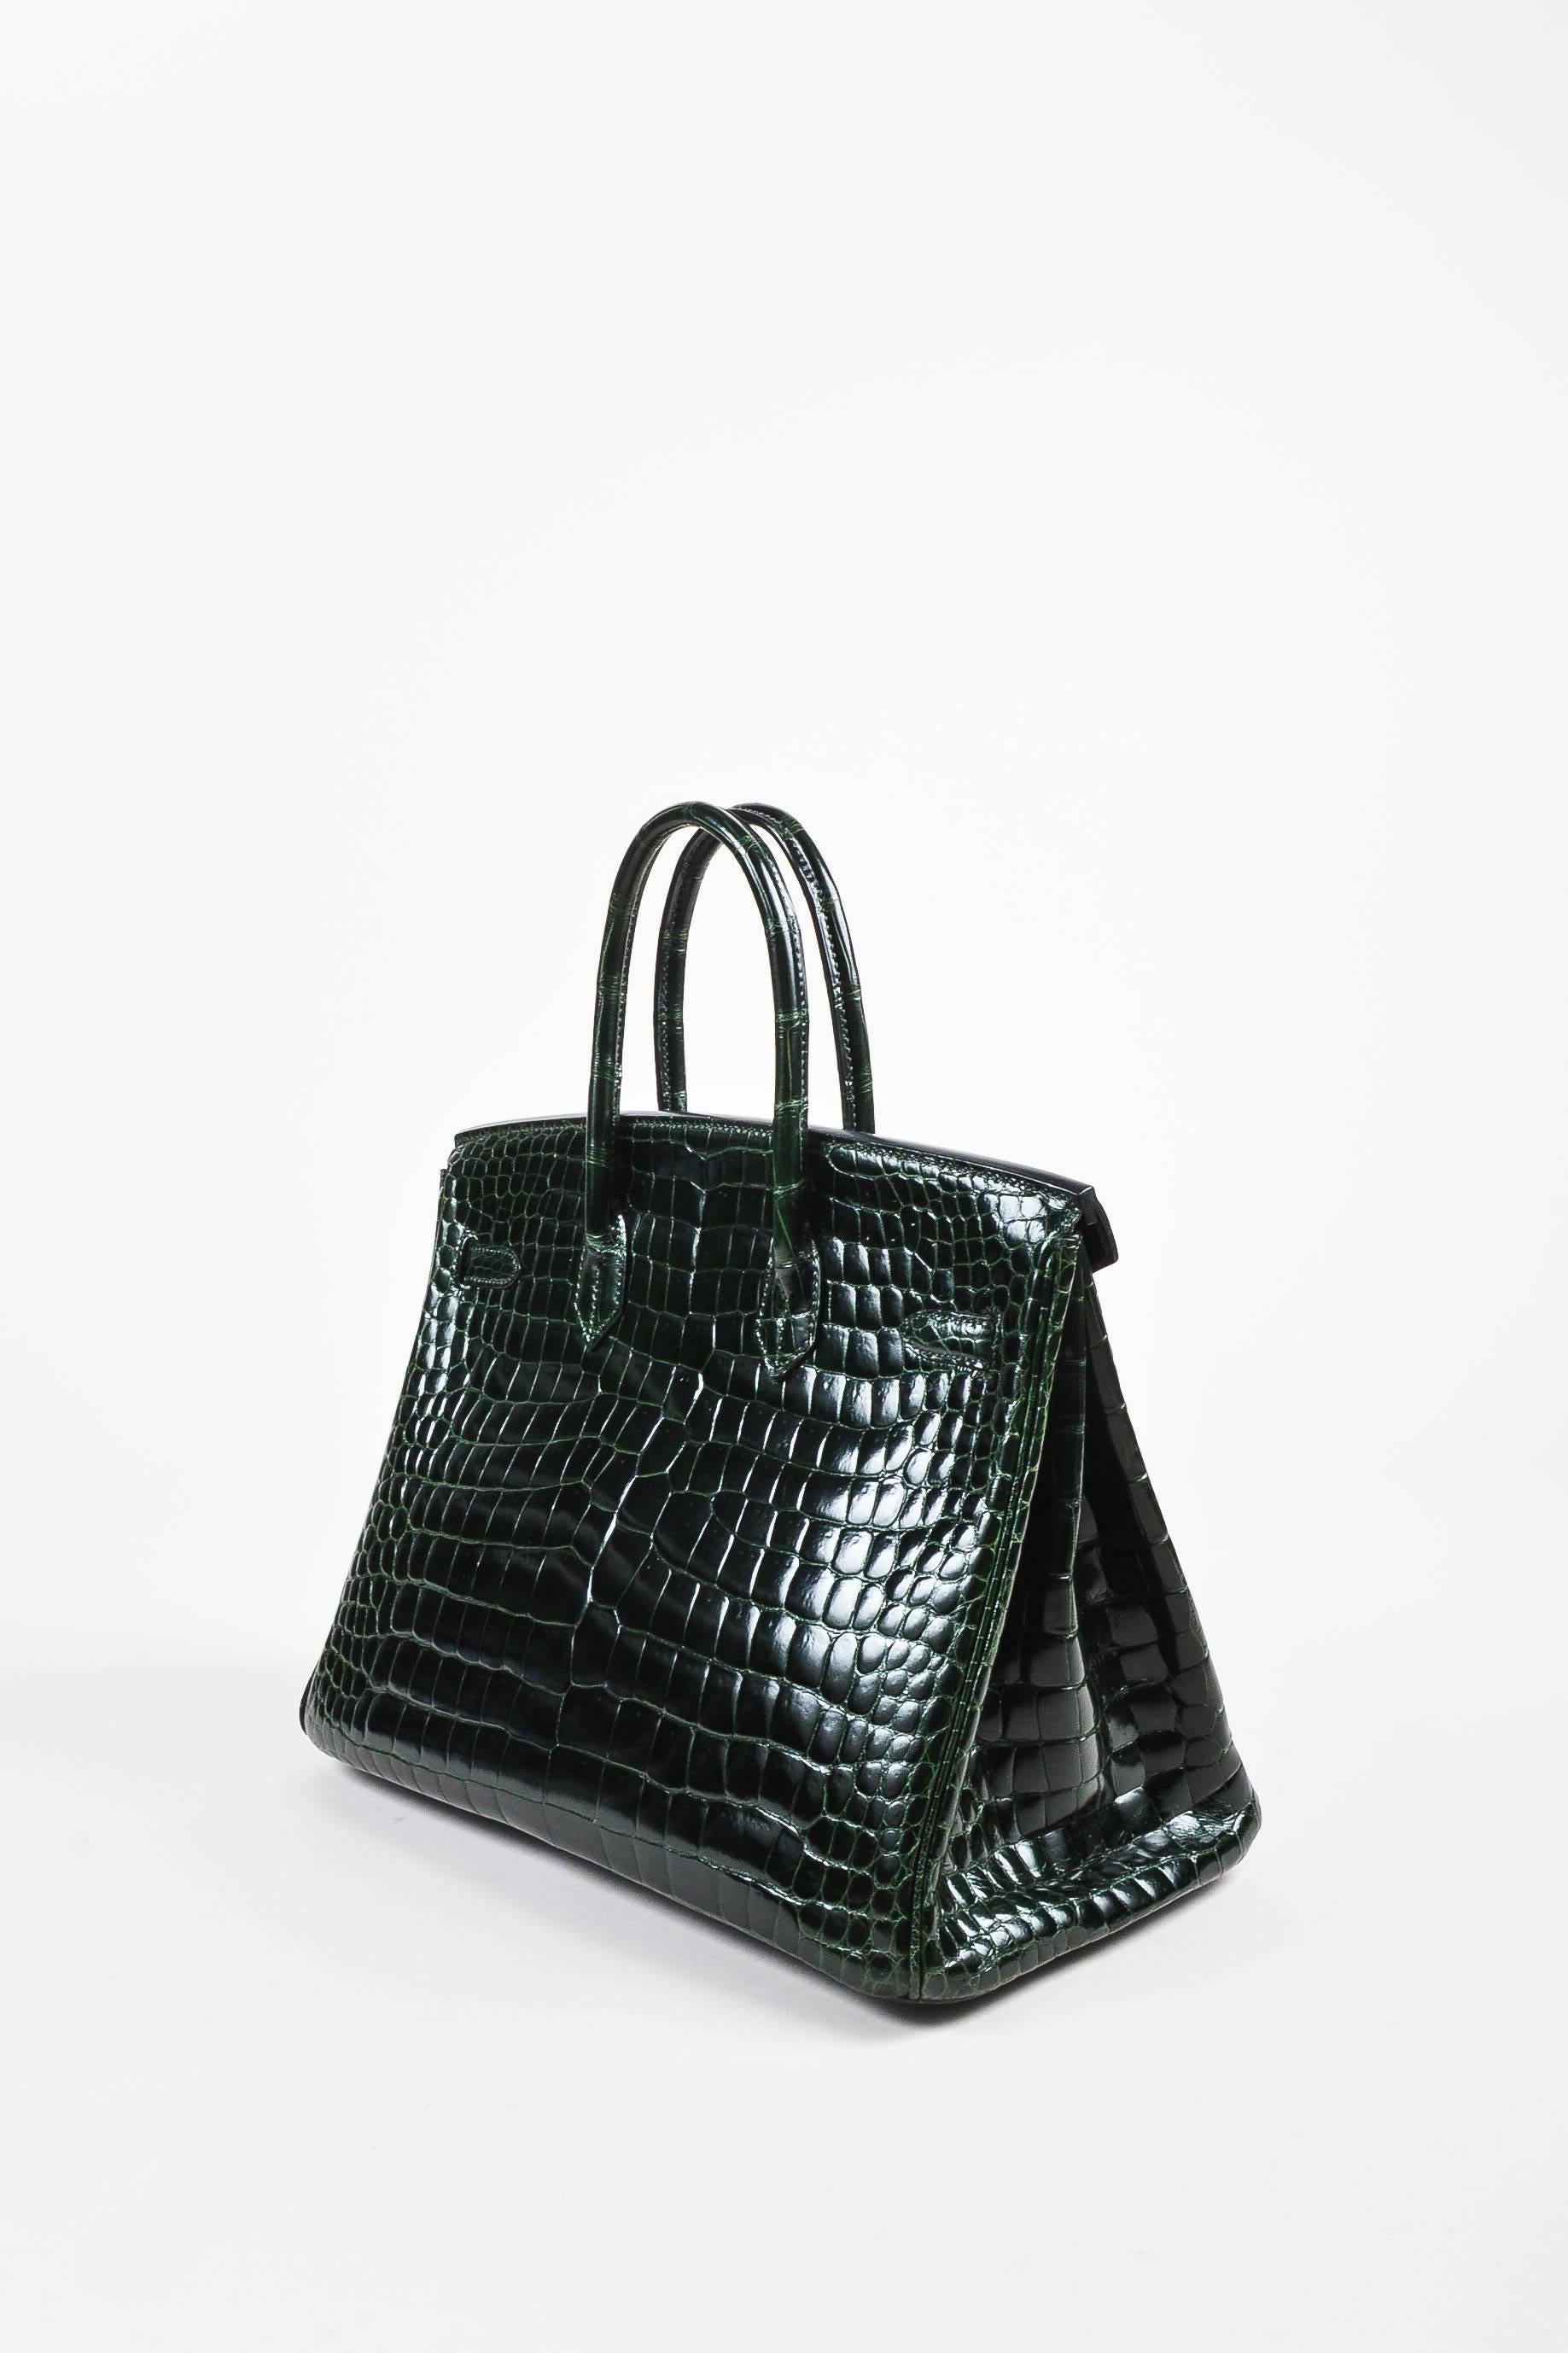 One of the most recognizable pieces amongst celebrities and fashion insiders alike--this 35 cm "Birkin" bag, from the French house Hermes, is an iconic collectible handcrafted in Paris. Masterfully constructed of shiny Porosus Crocodile